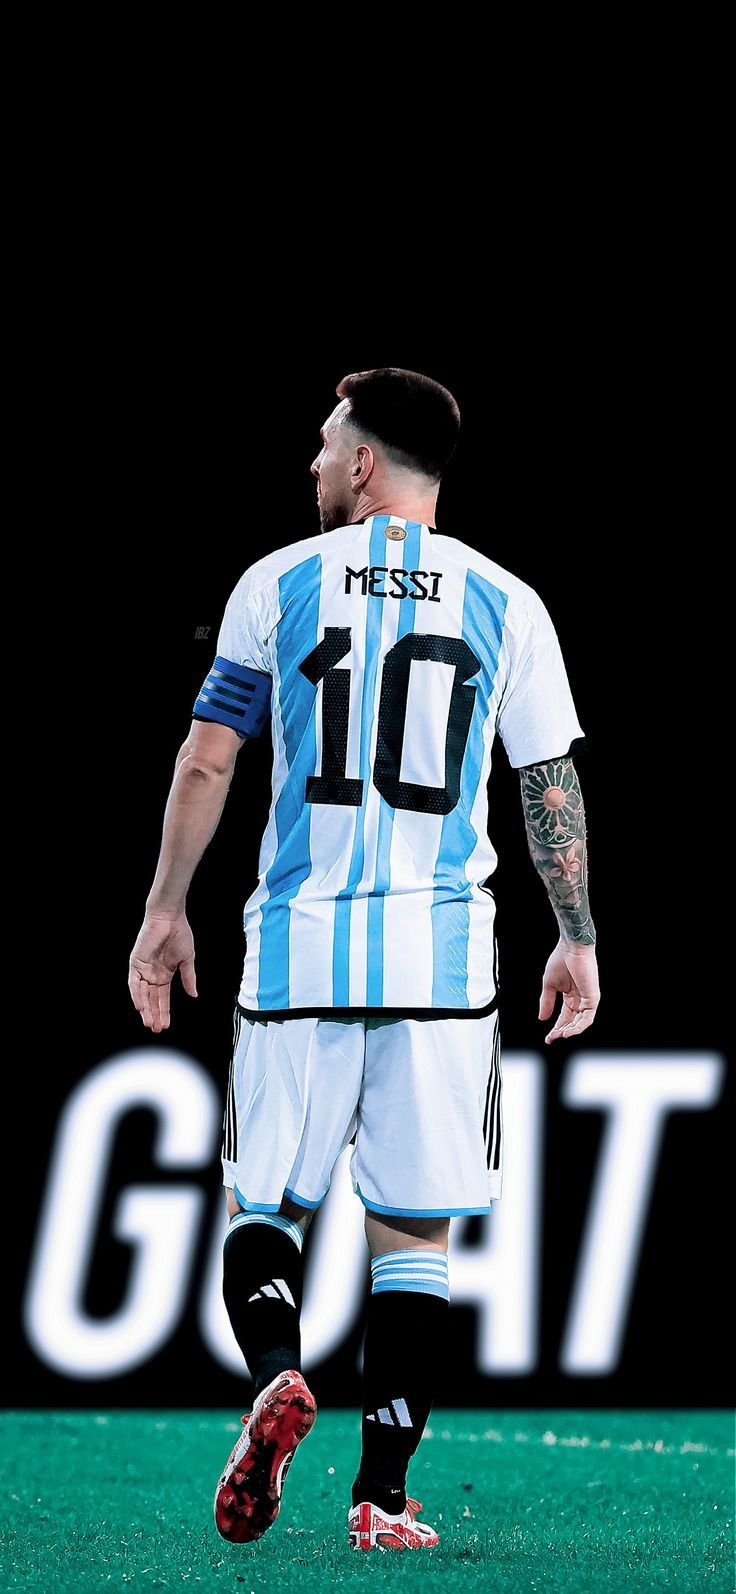 Messi HD Wallpaper Download For